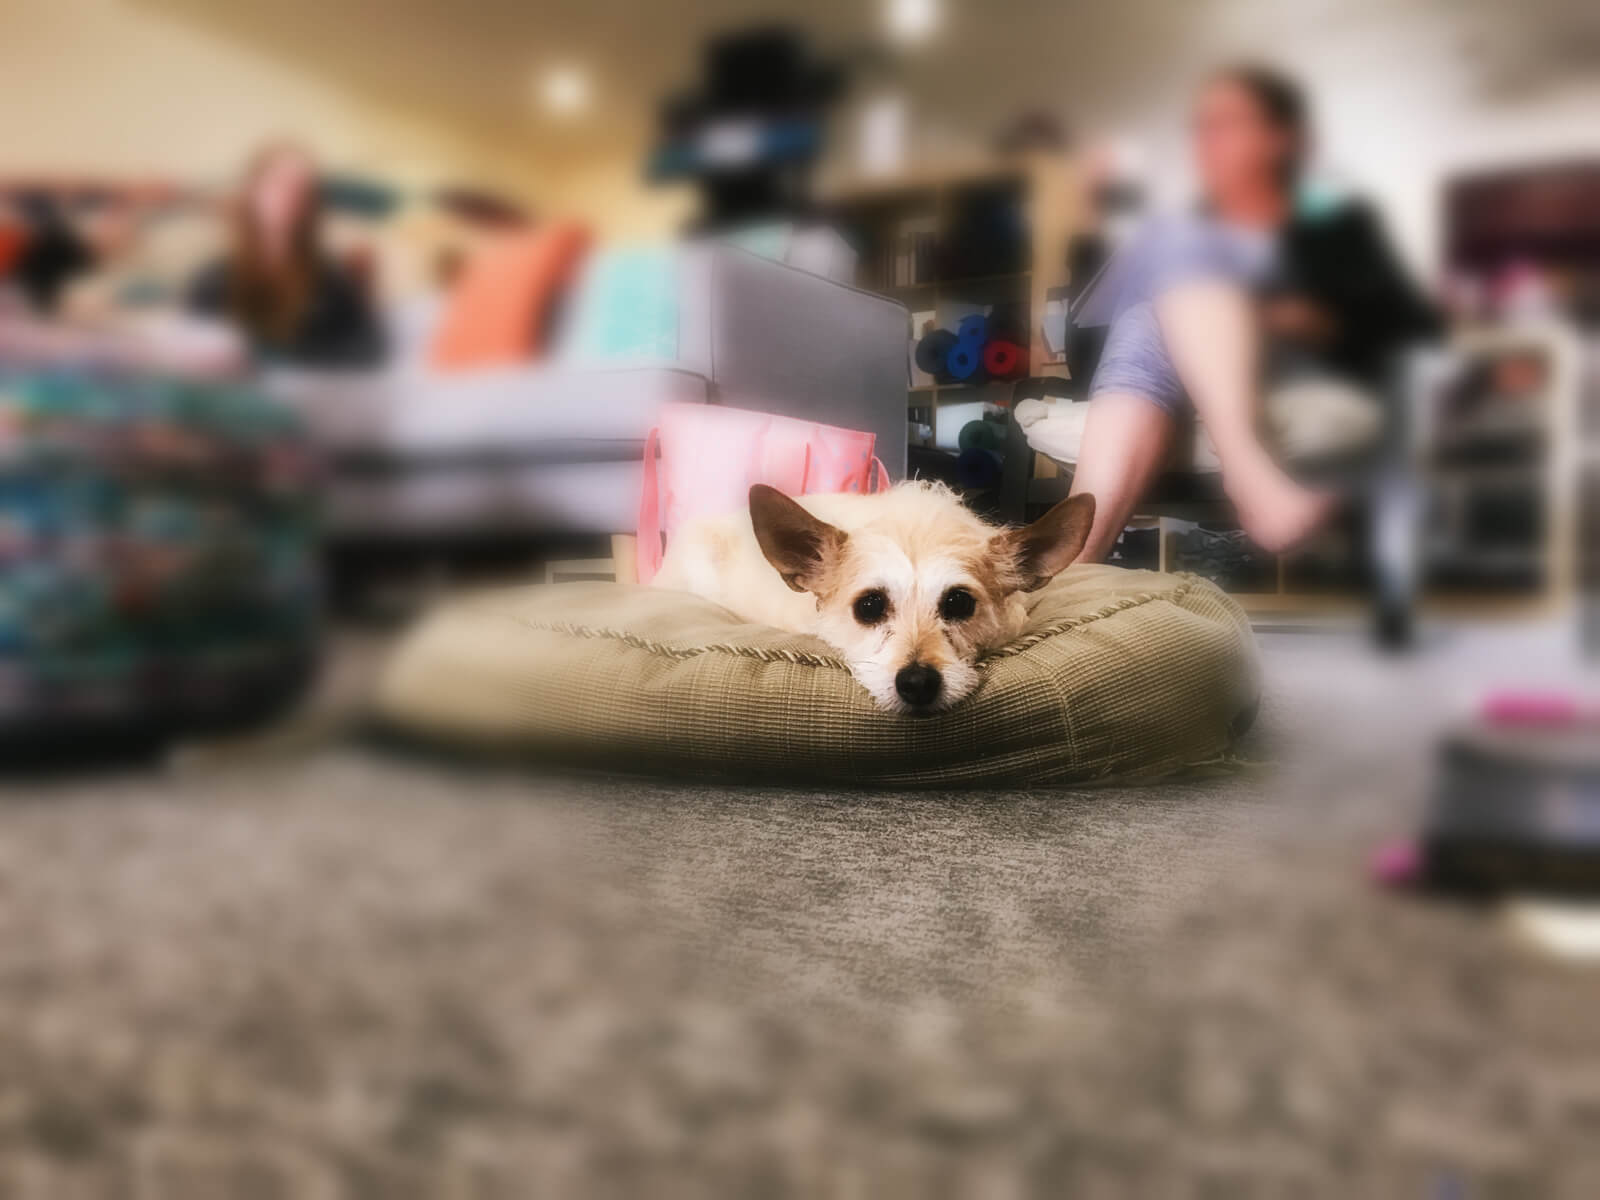 a photo of Sasha, a small dog, on her bed